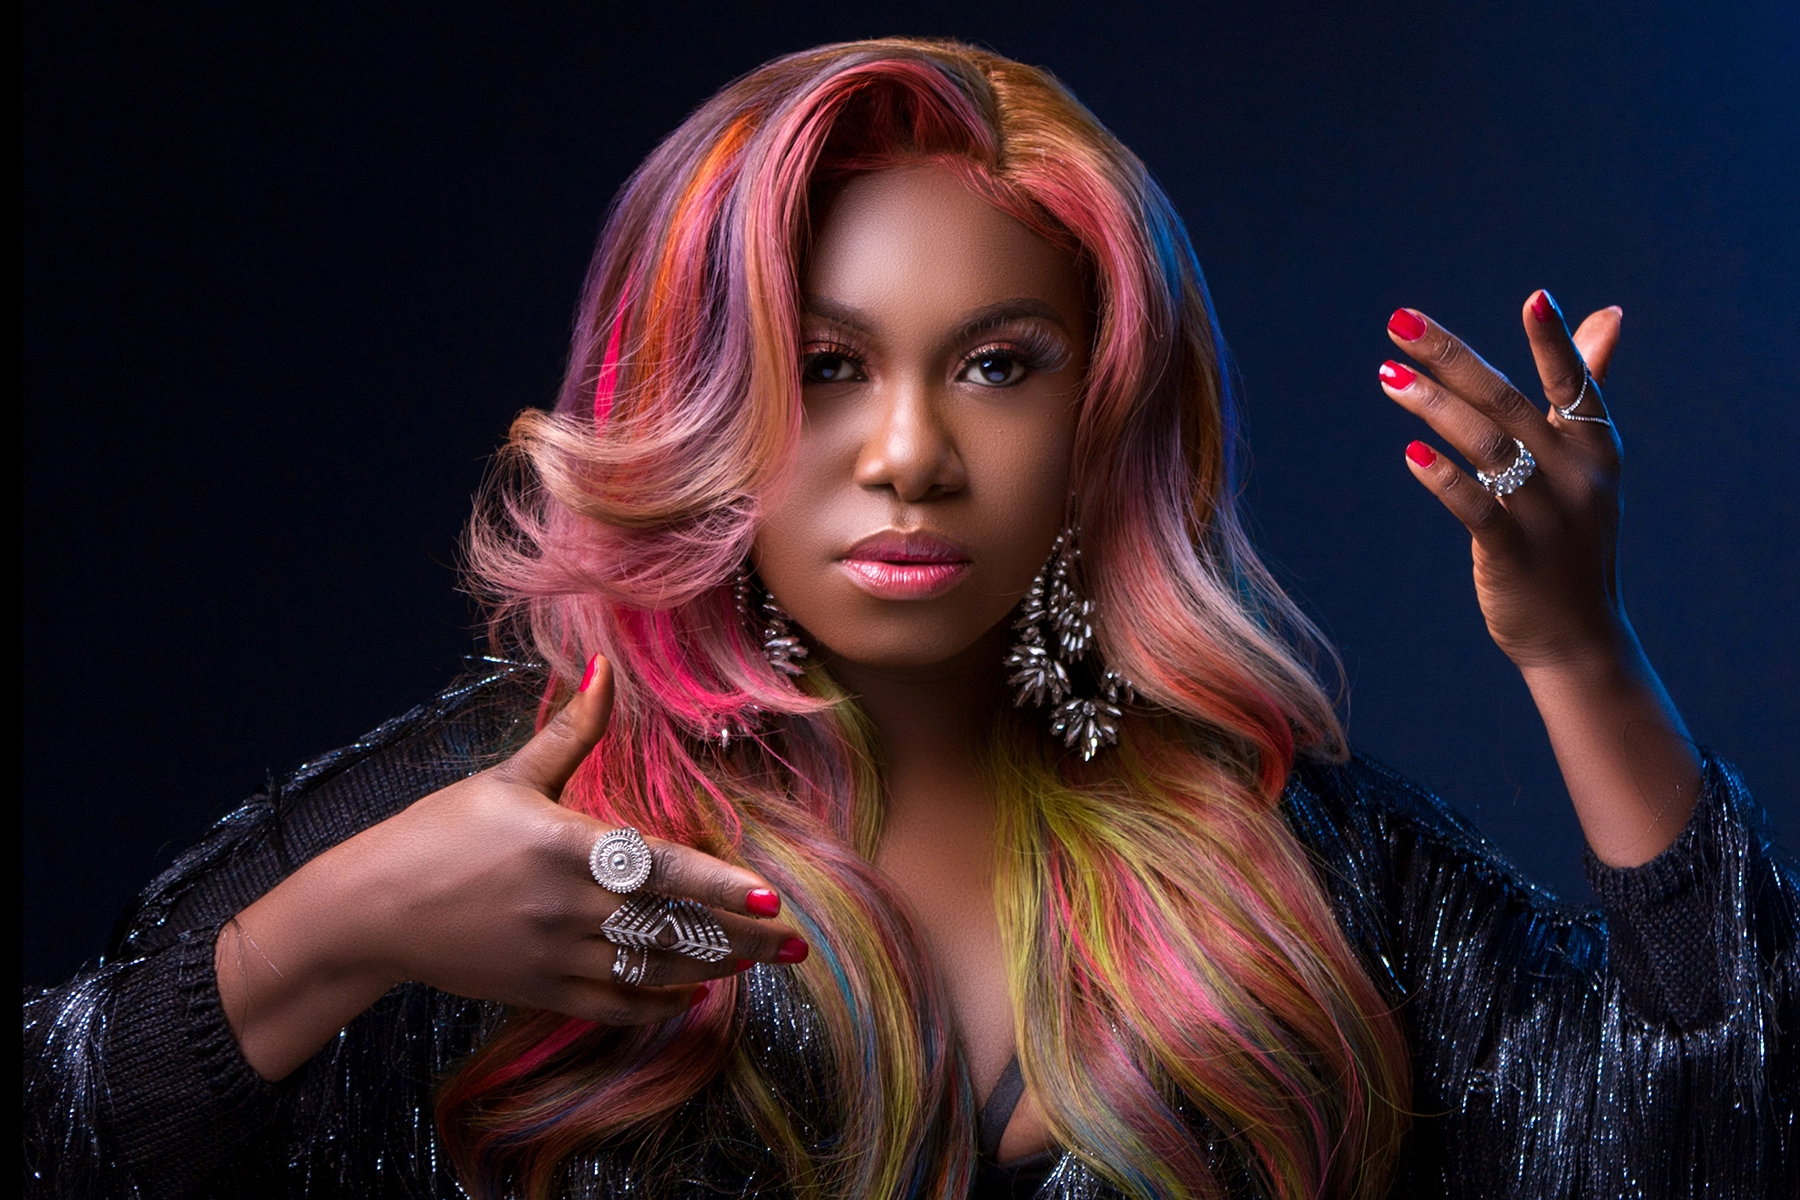 Singer Niniola shares her pains as she’s served “better breakfast”